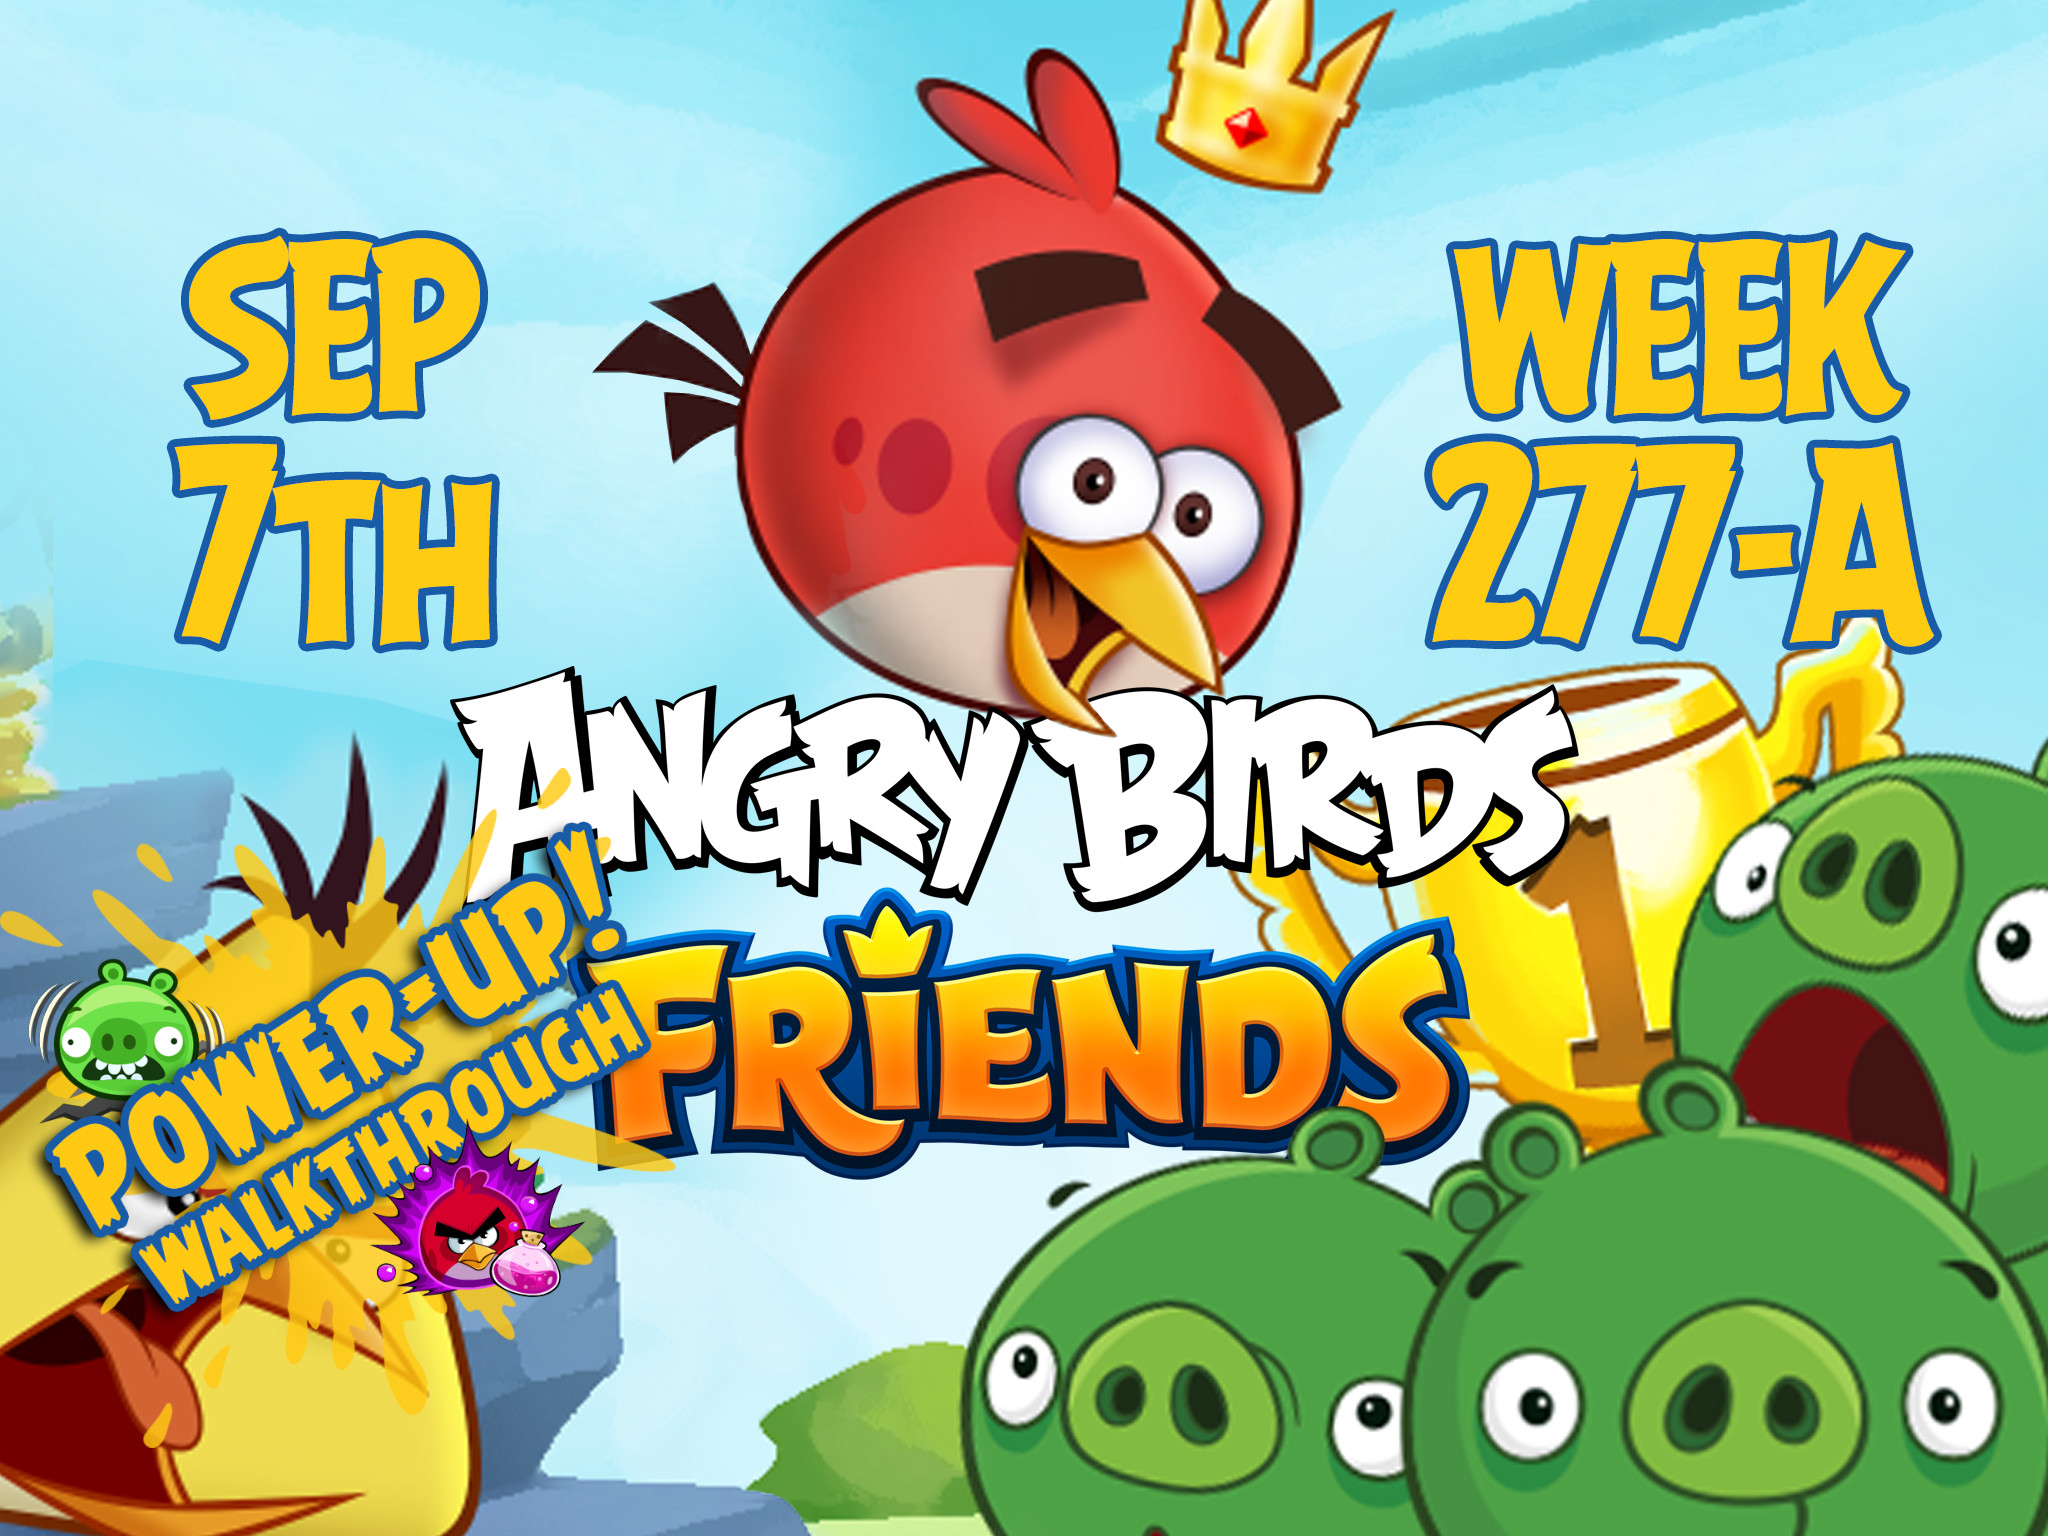 Angry Birds Friends Tournament Week 277-A Feature Image PU